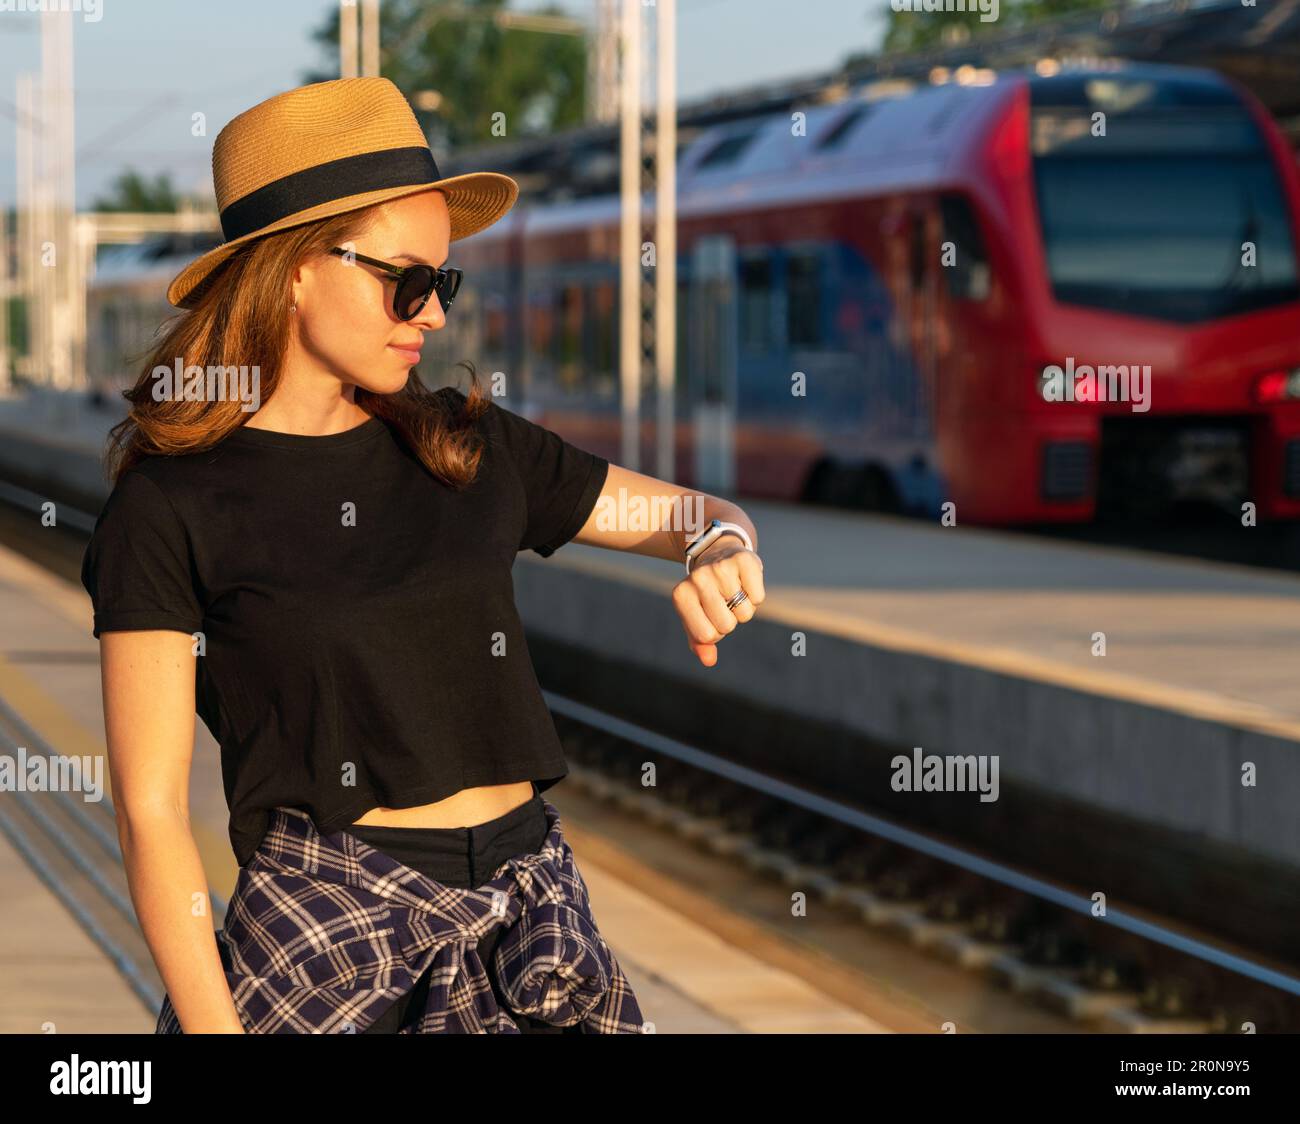 Woman in straw hat and sunglasses standing on railway platform and waiting her train, looking at watch. Stock Photo